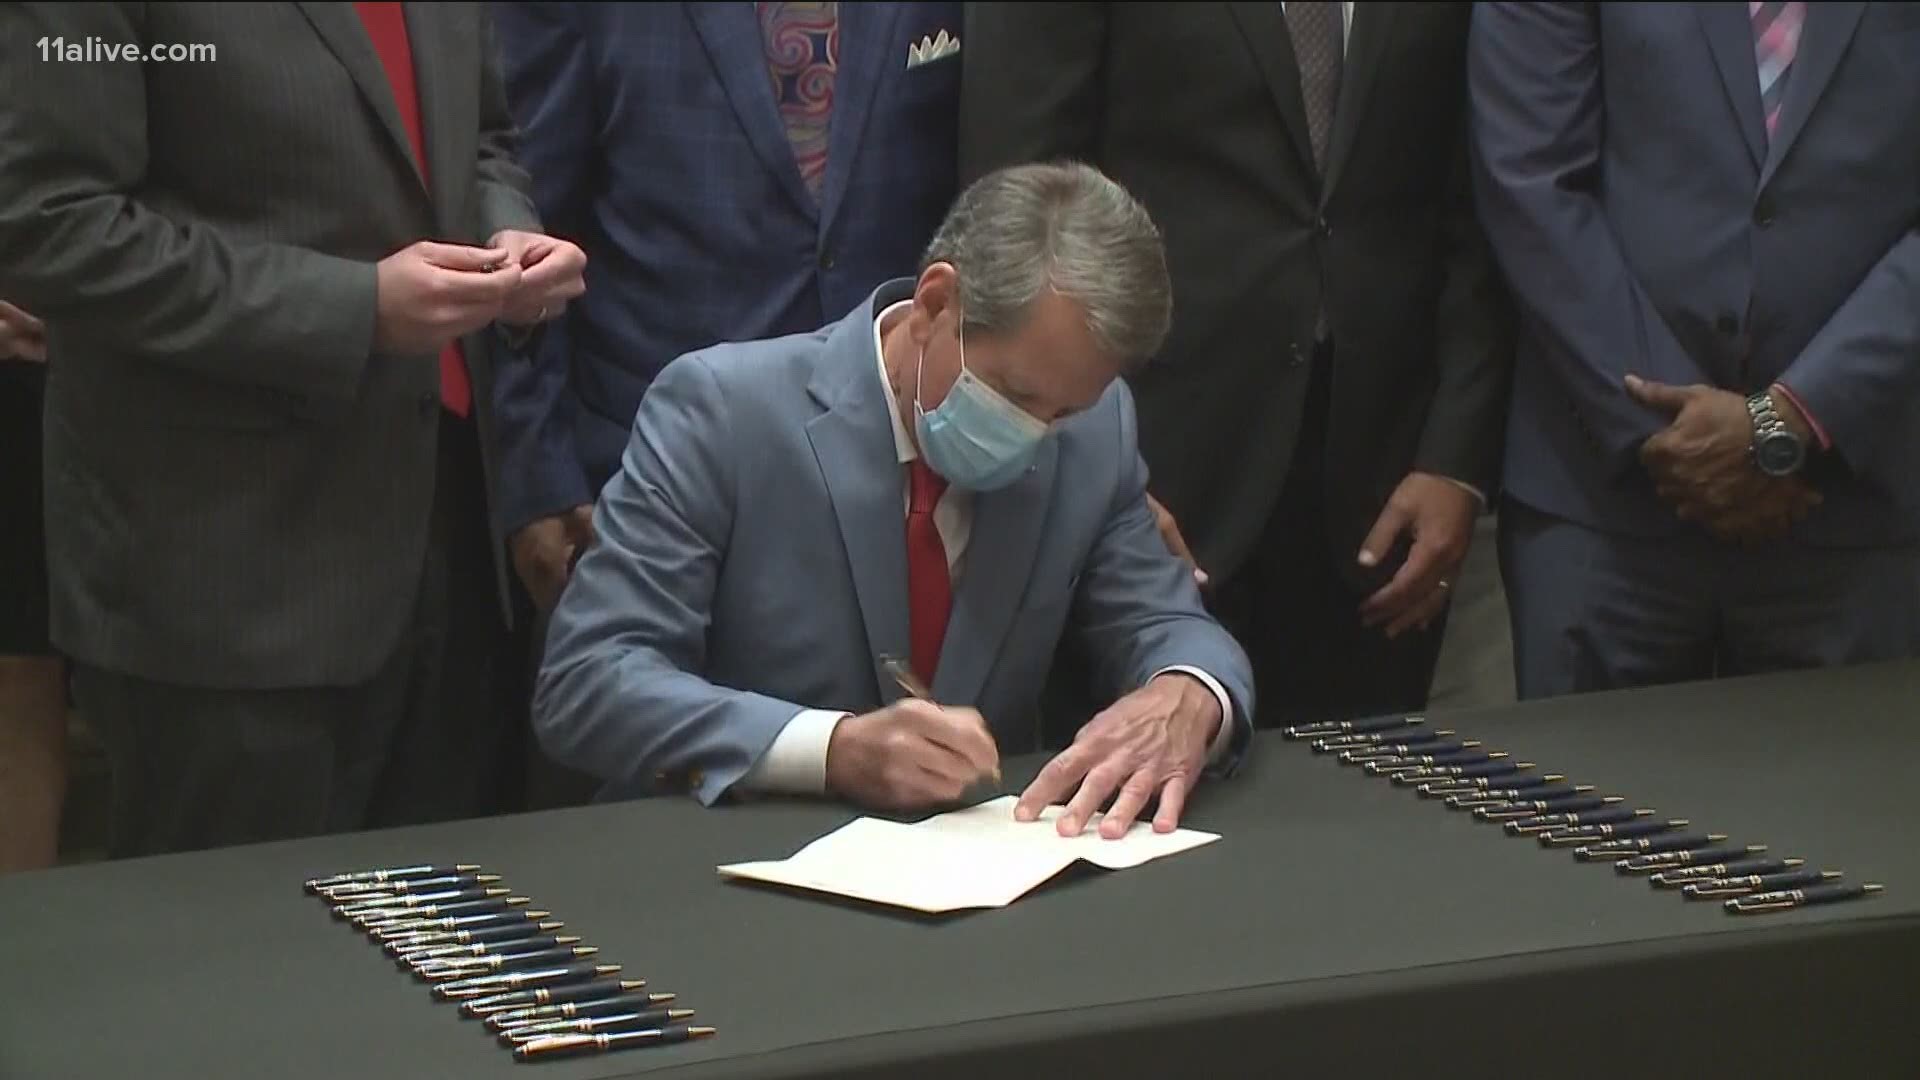 Gov. Kemp's office confirmed as a previous executive order with COVID-19 restrictions and guidance expires on Saturday the governor is expected to sign a new order.